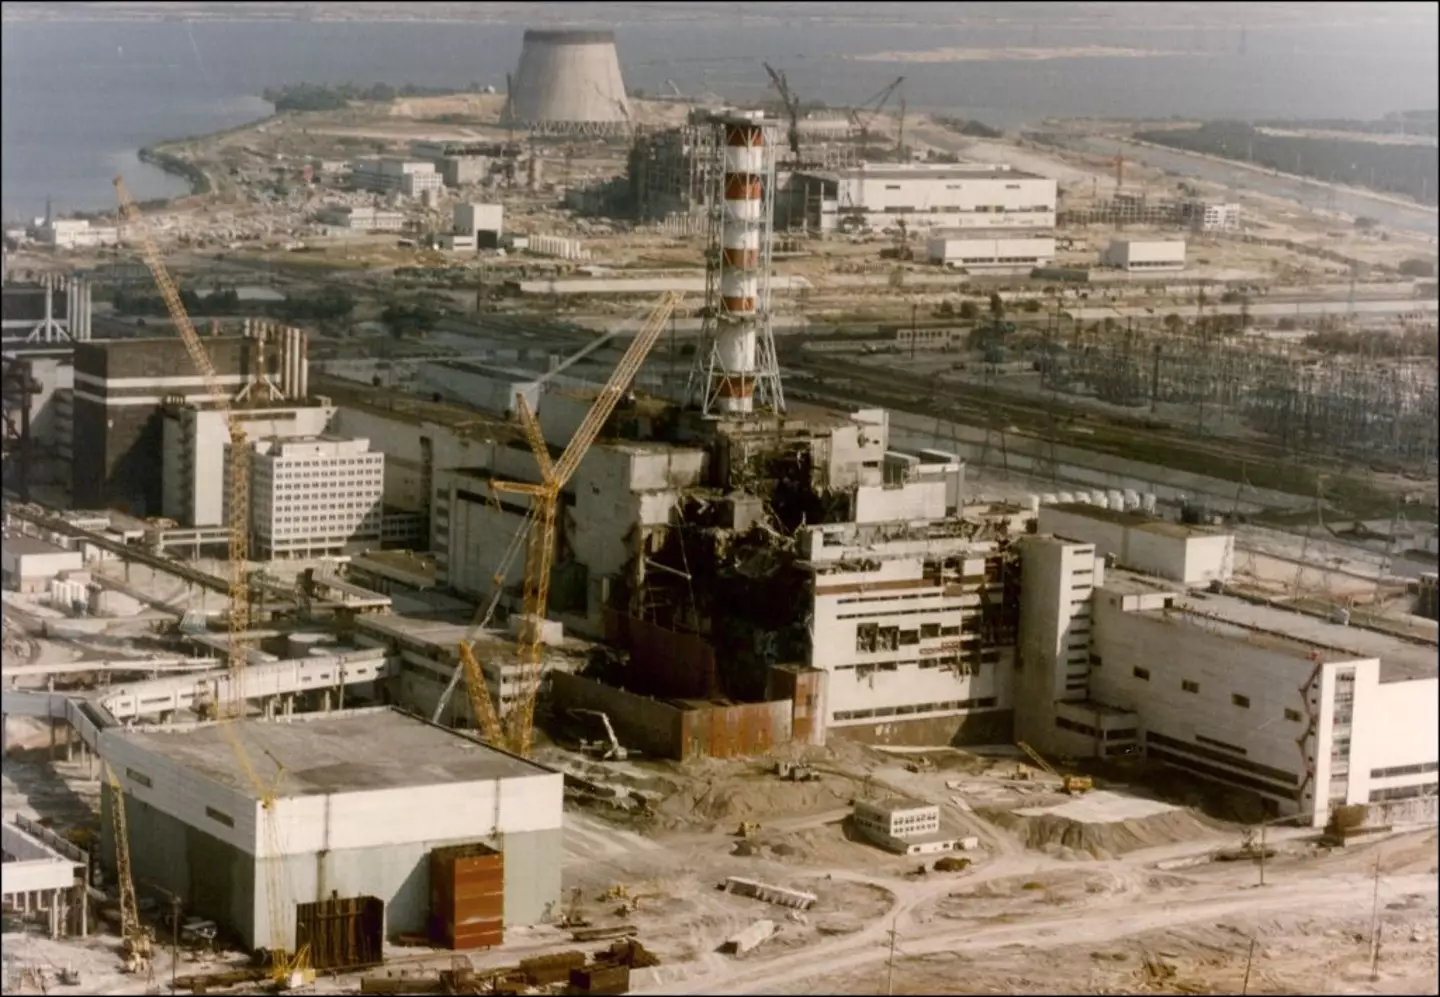 In April 1986, Chernobyl's Reactor 4 went into meltdown, resulting in one of the worst nuclear disasters in history.